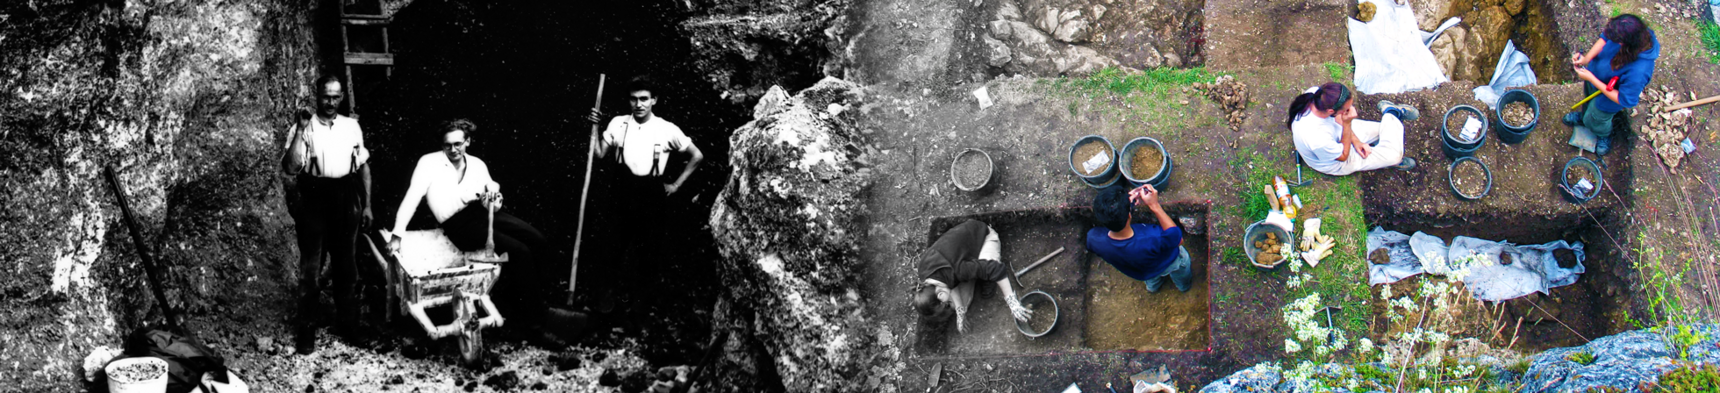 Excavations in Vogelherd Cave in 1931 (left) and in the backdirt of these old excavations in 2008 (right).